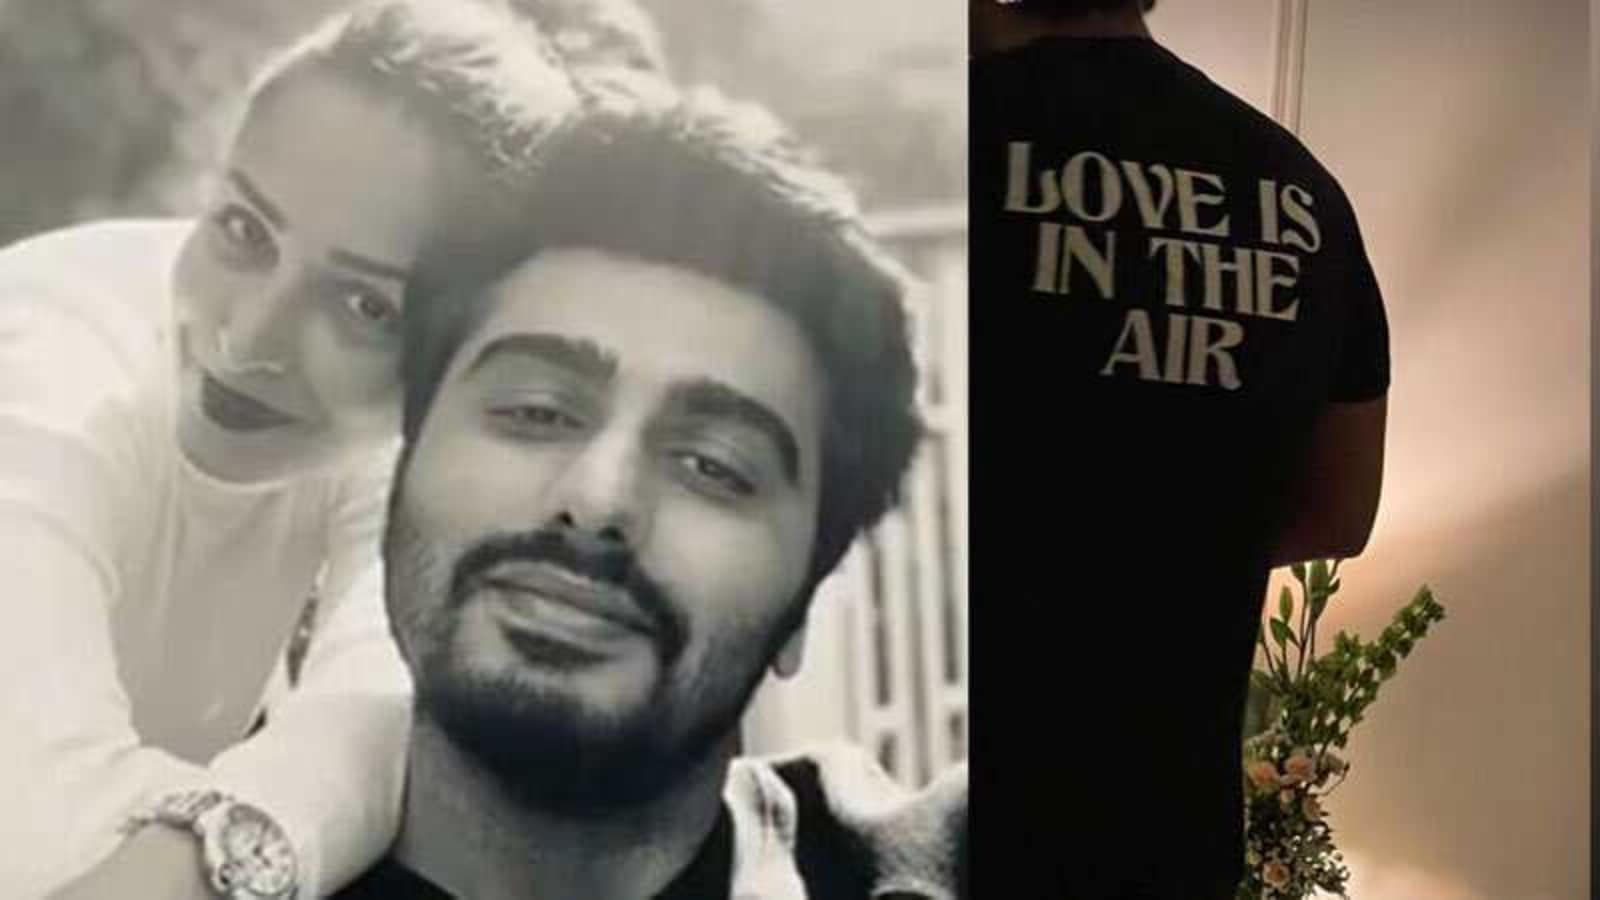 Download Malaika Arora Arjun Kapoor Get Together Ahead Of Valentine S Day Hint At Special Celebration Love Is In The Air Bollywood Hindustan Times